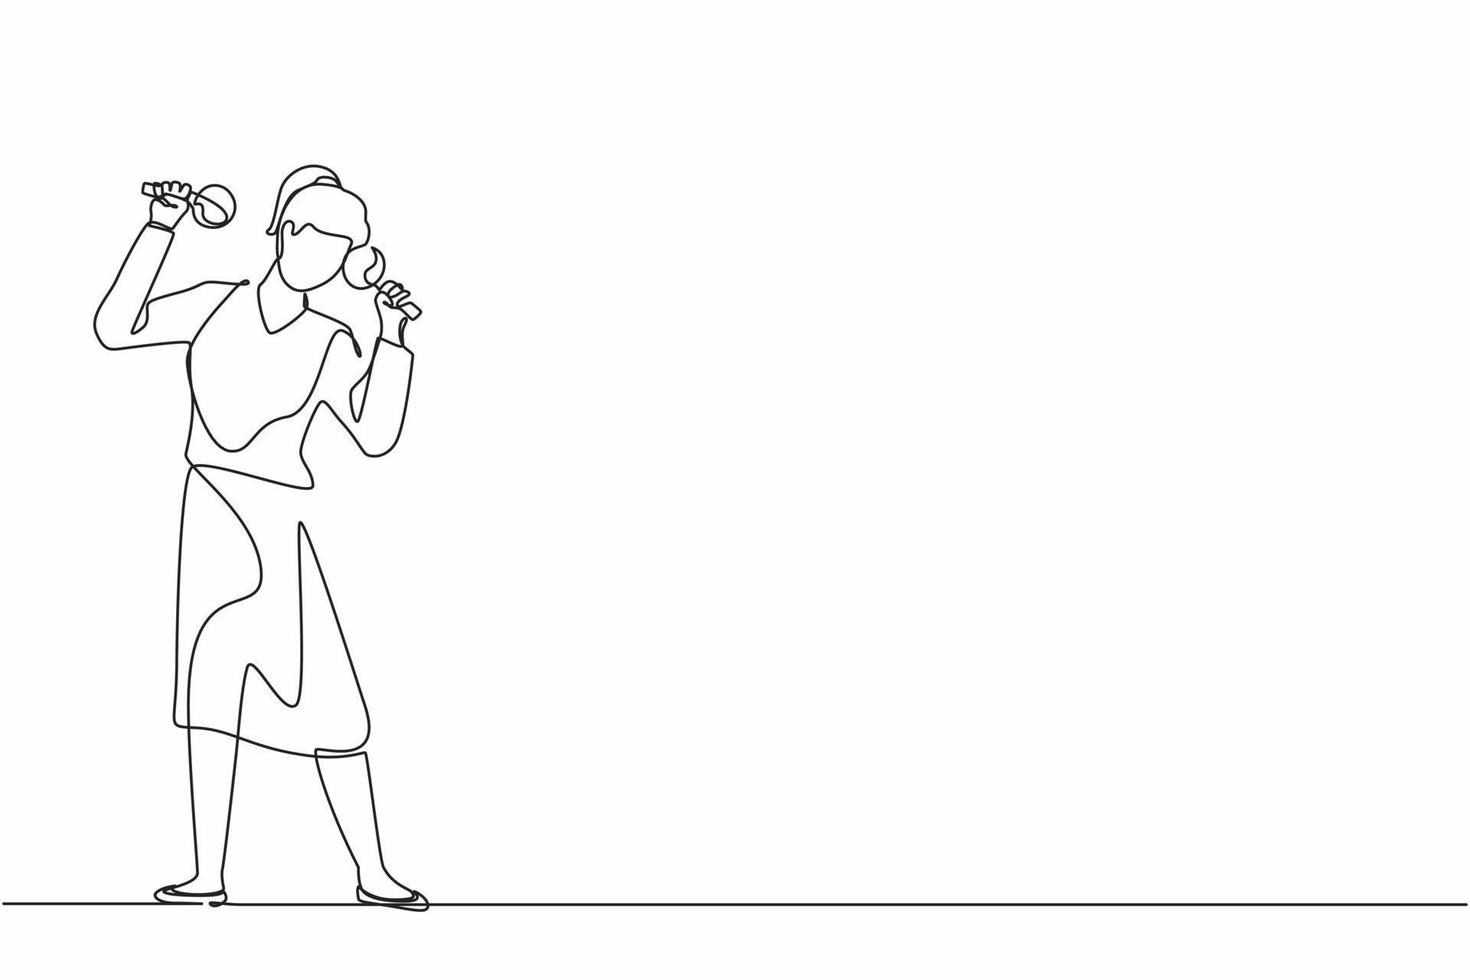 Continuous one line drawing woman street band player mariachi plays maracas. Female performer with maracas musical instruments, mariachi player at national festival. Single line design vector graphic